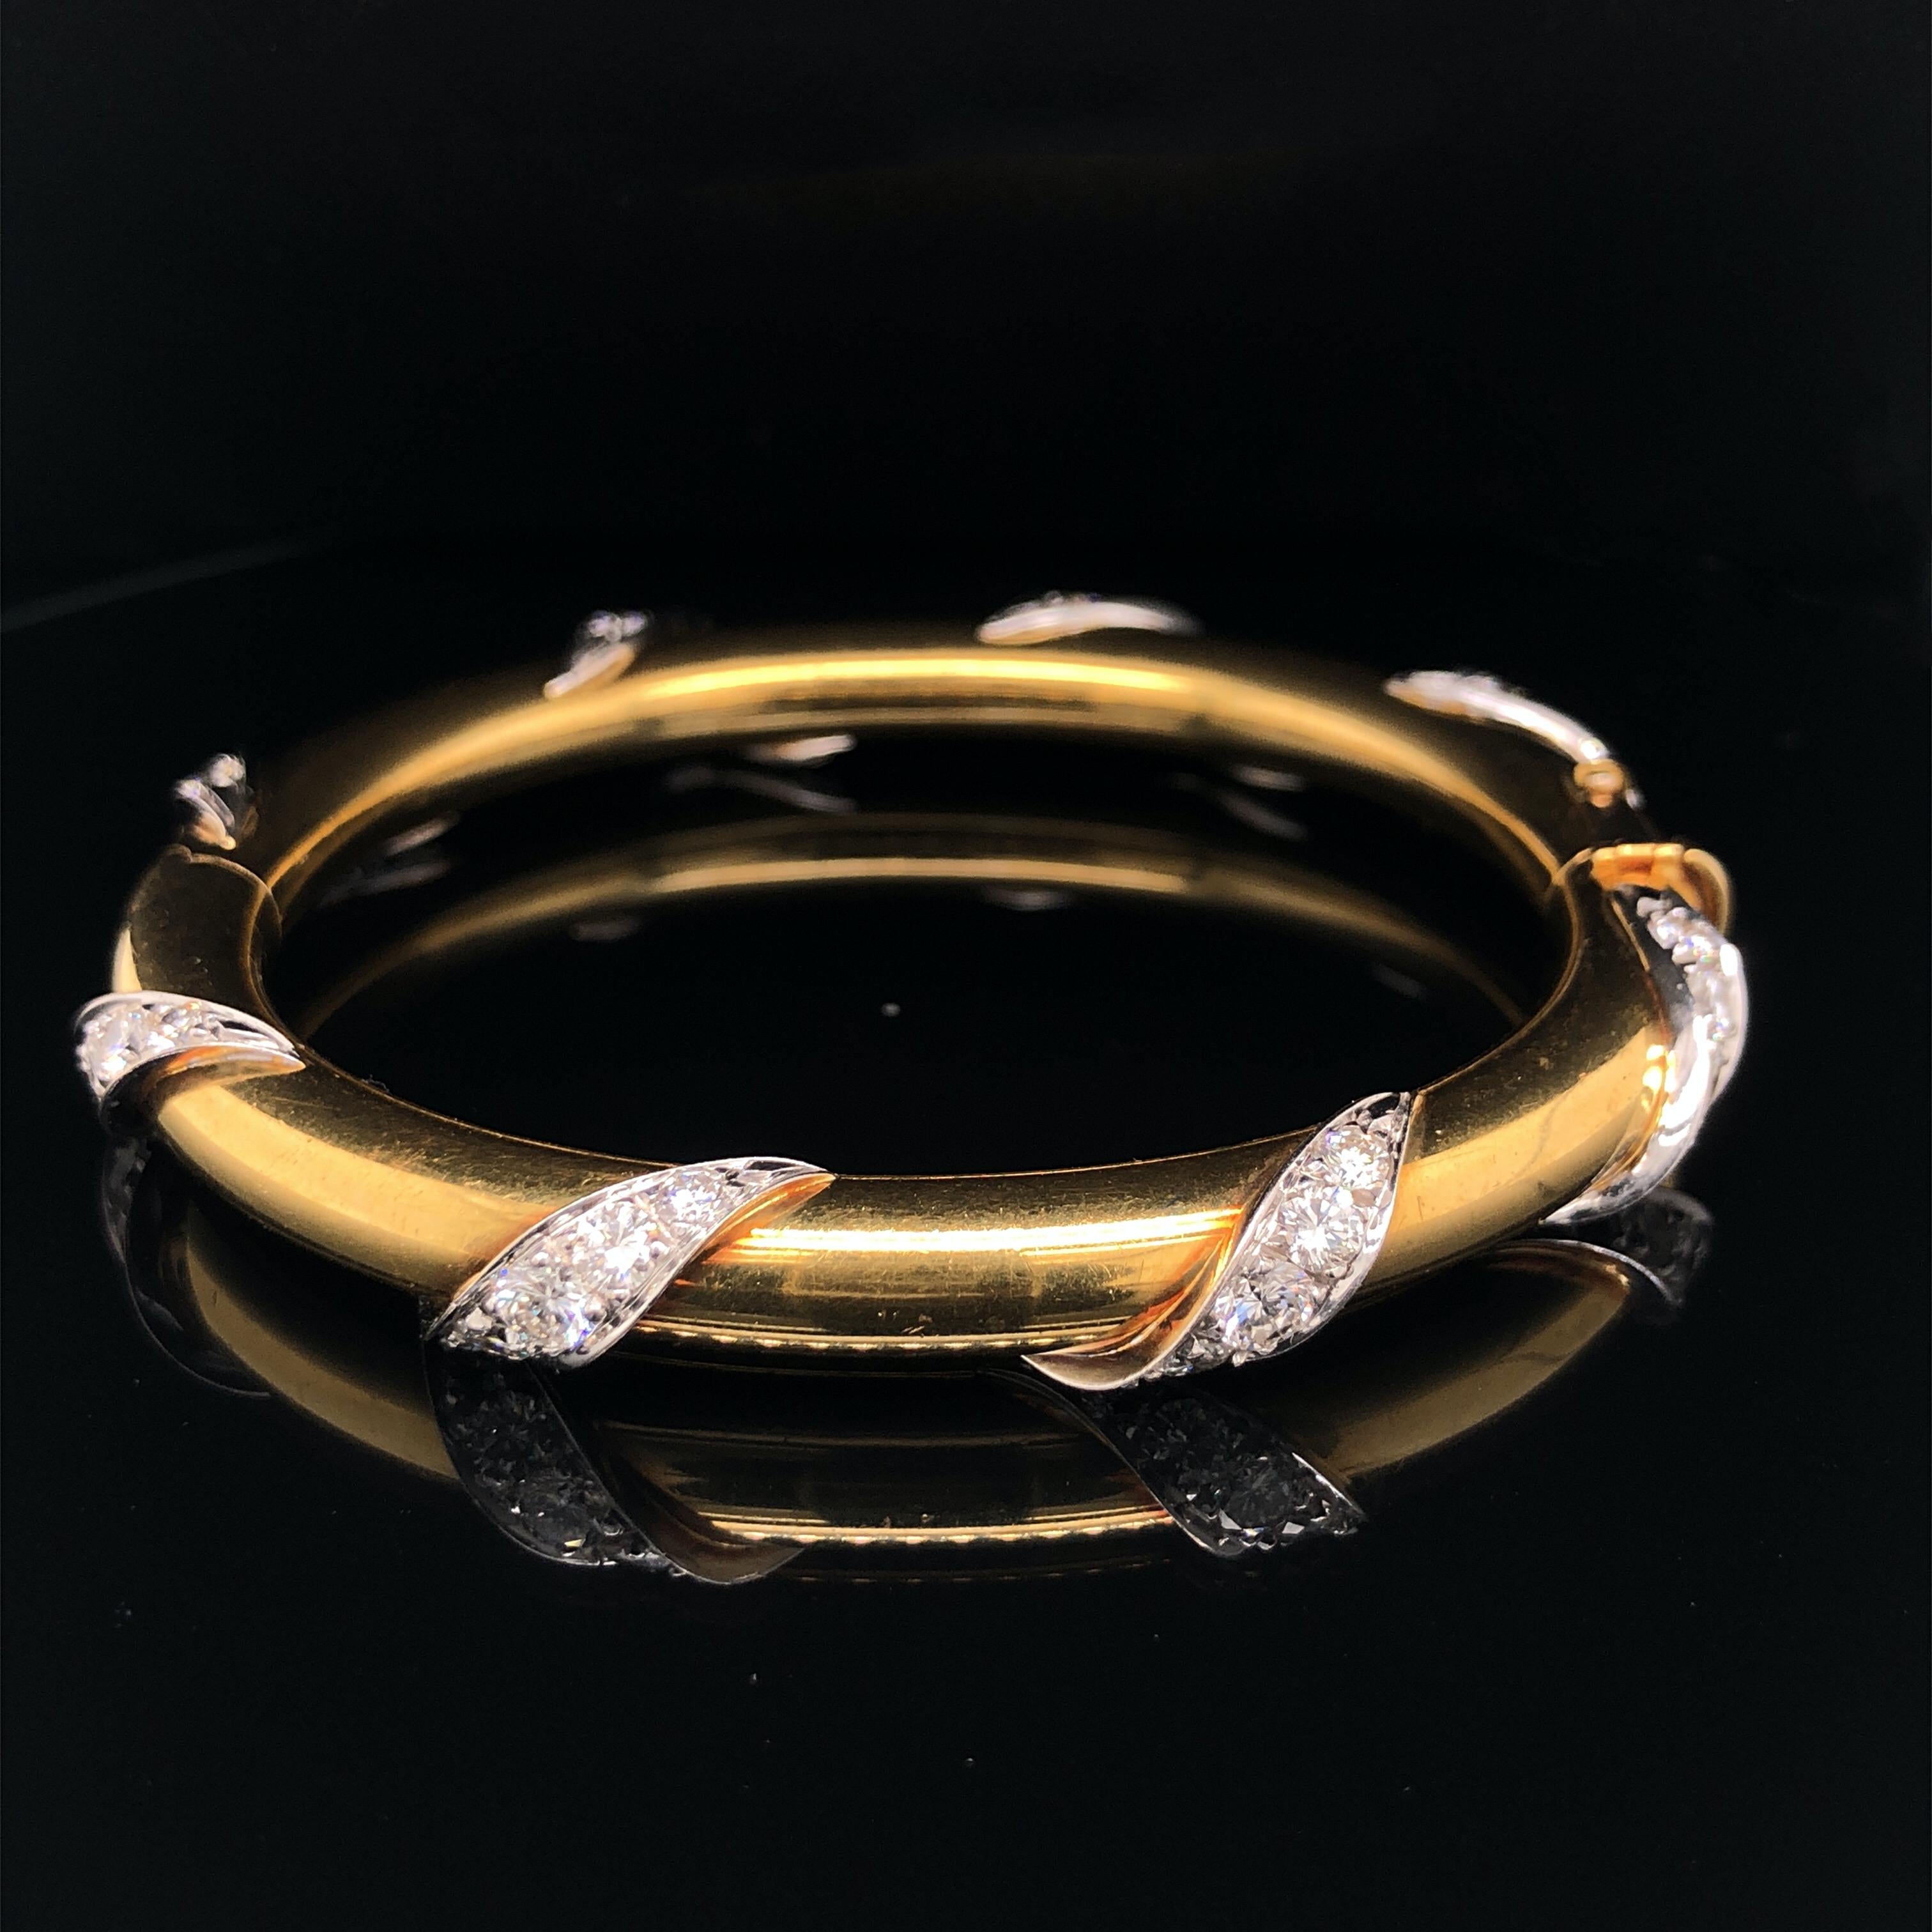 A diamond and 18k yellow gold bangle, 20th Century. 

The bangle is oval shaped with an inner diameter of 5.8cm wide. It is designed with 8 engulfing panels, which are set with round brilliant cut diamonds. The total diamond weight is approximately